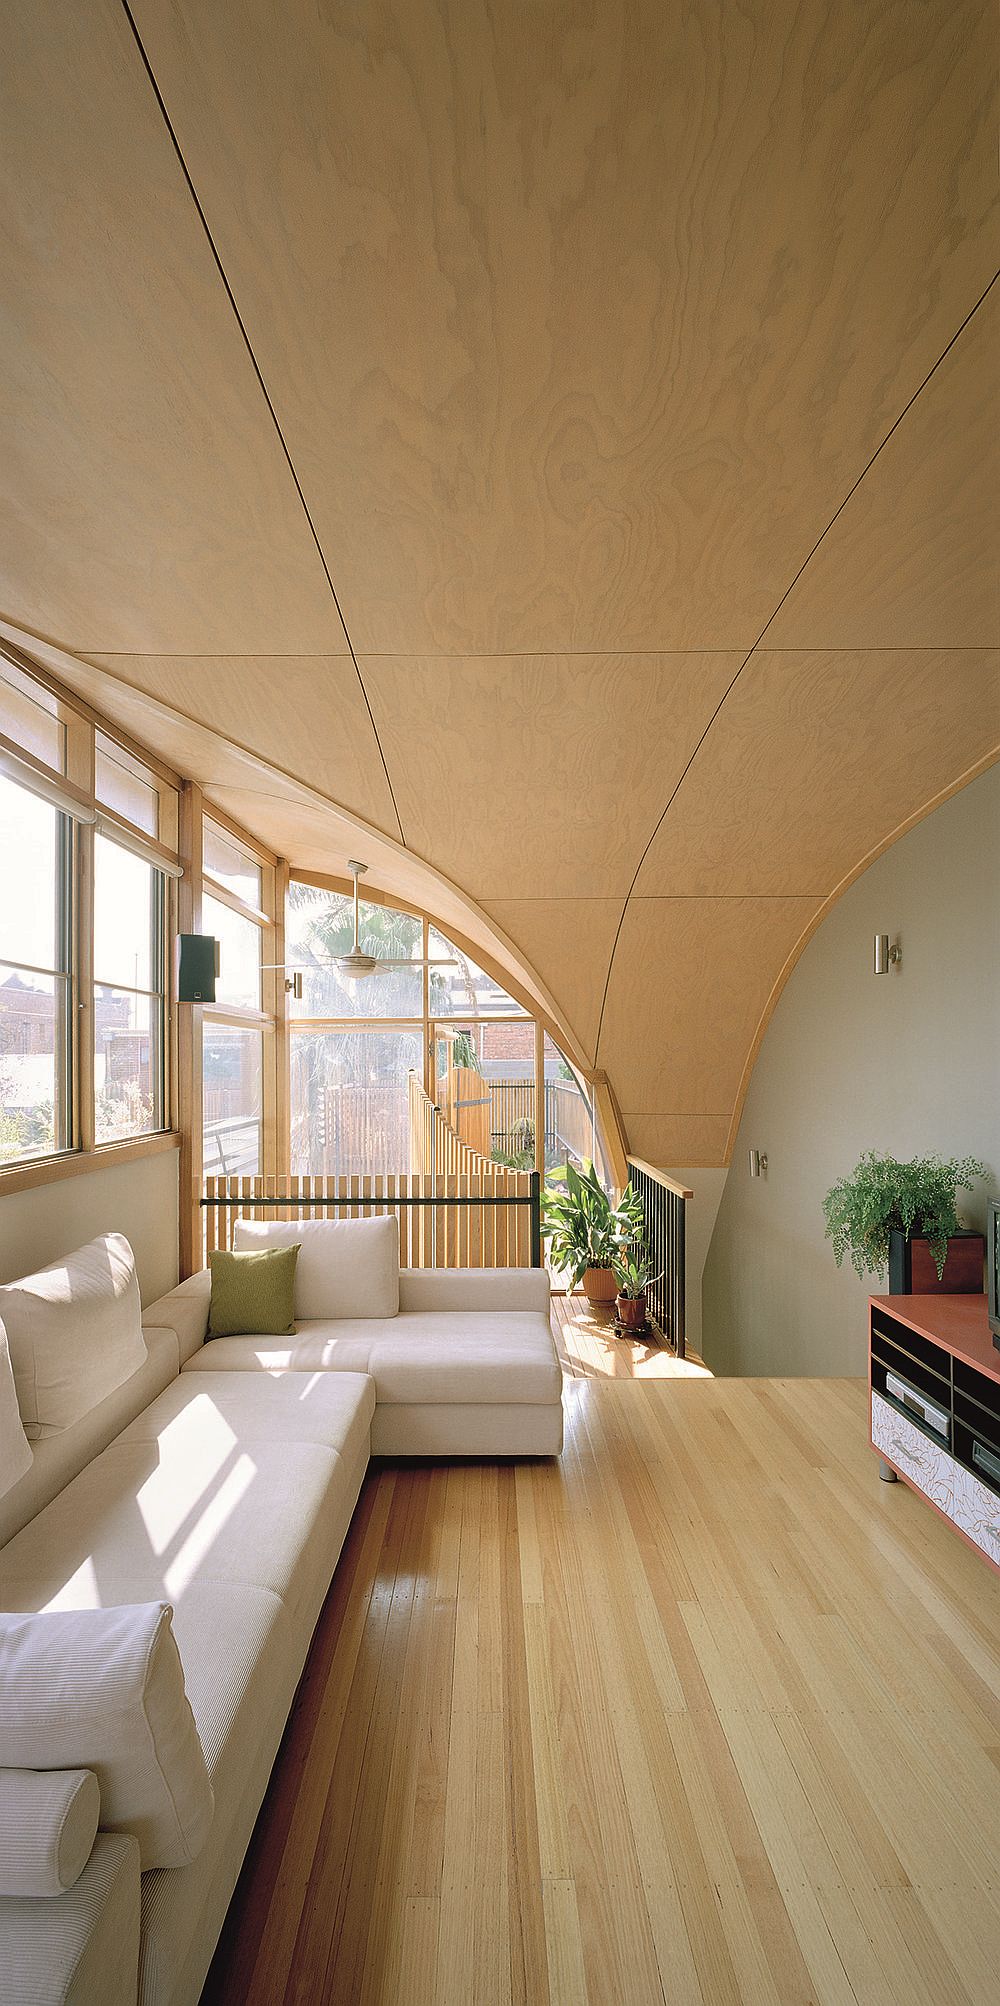 Exceptional curved roof design adds to the interior visual as well